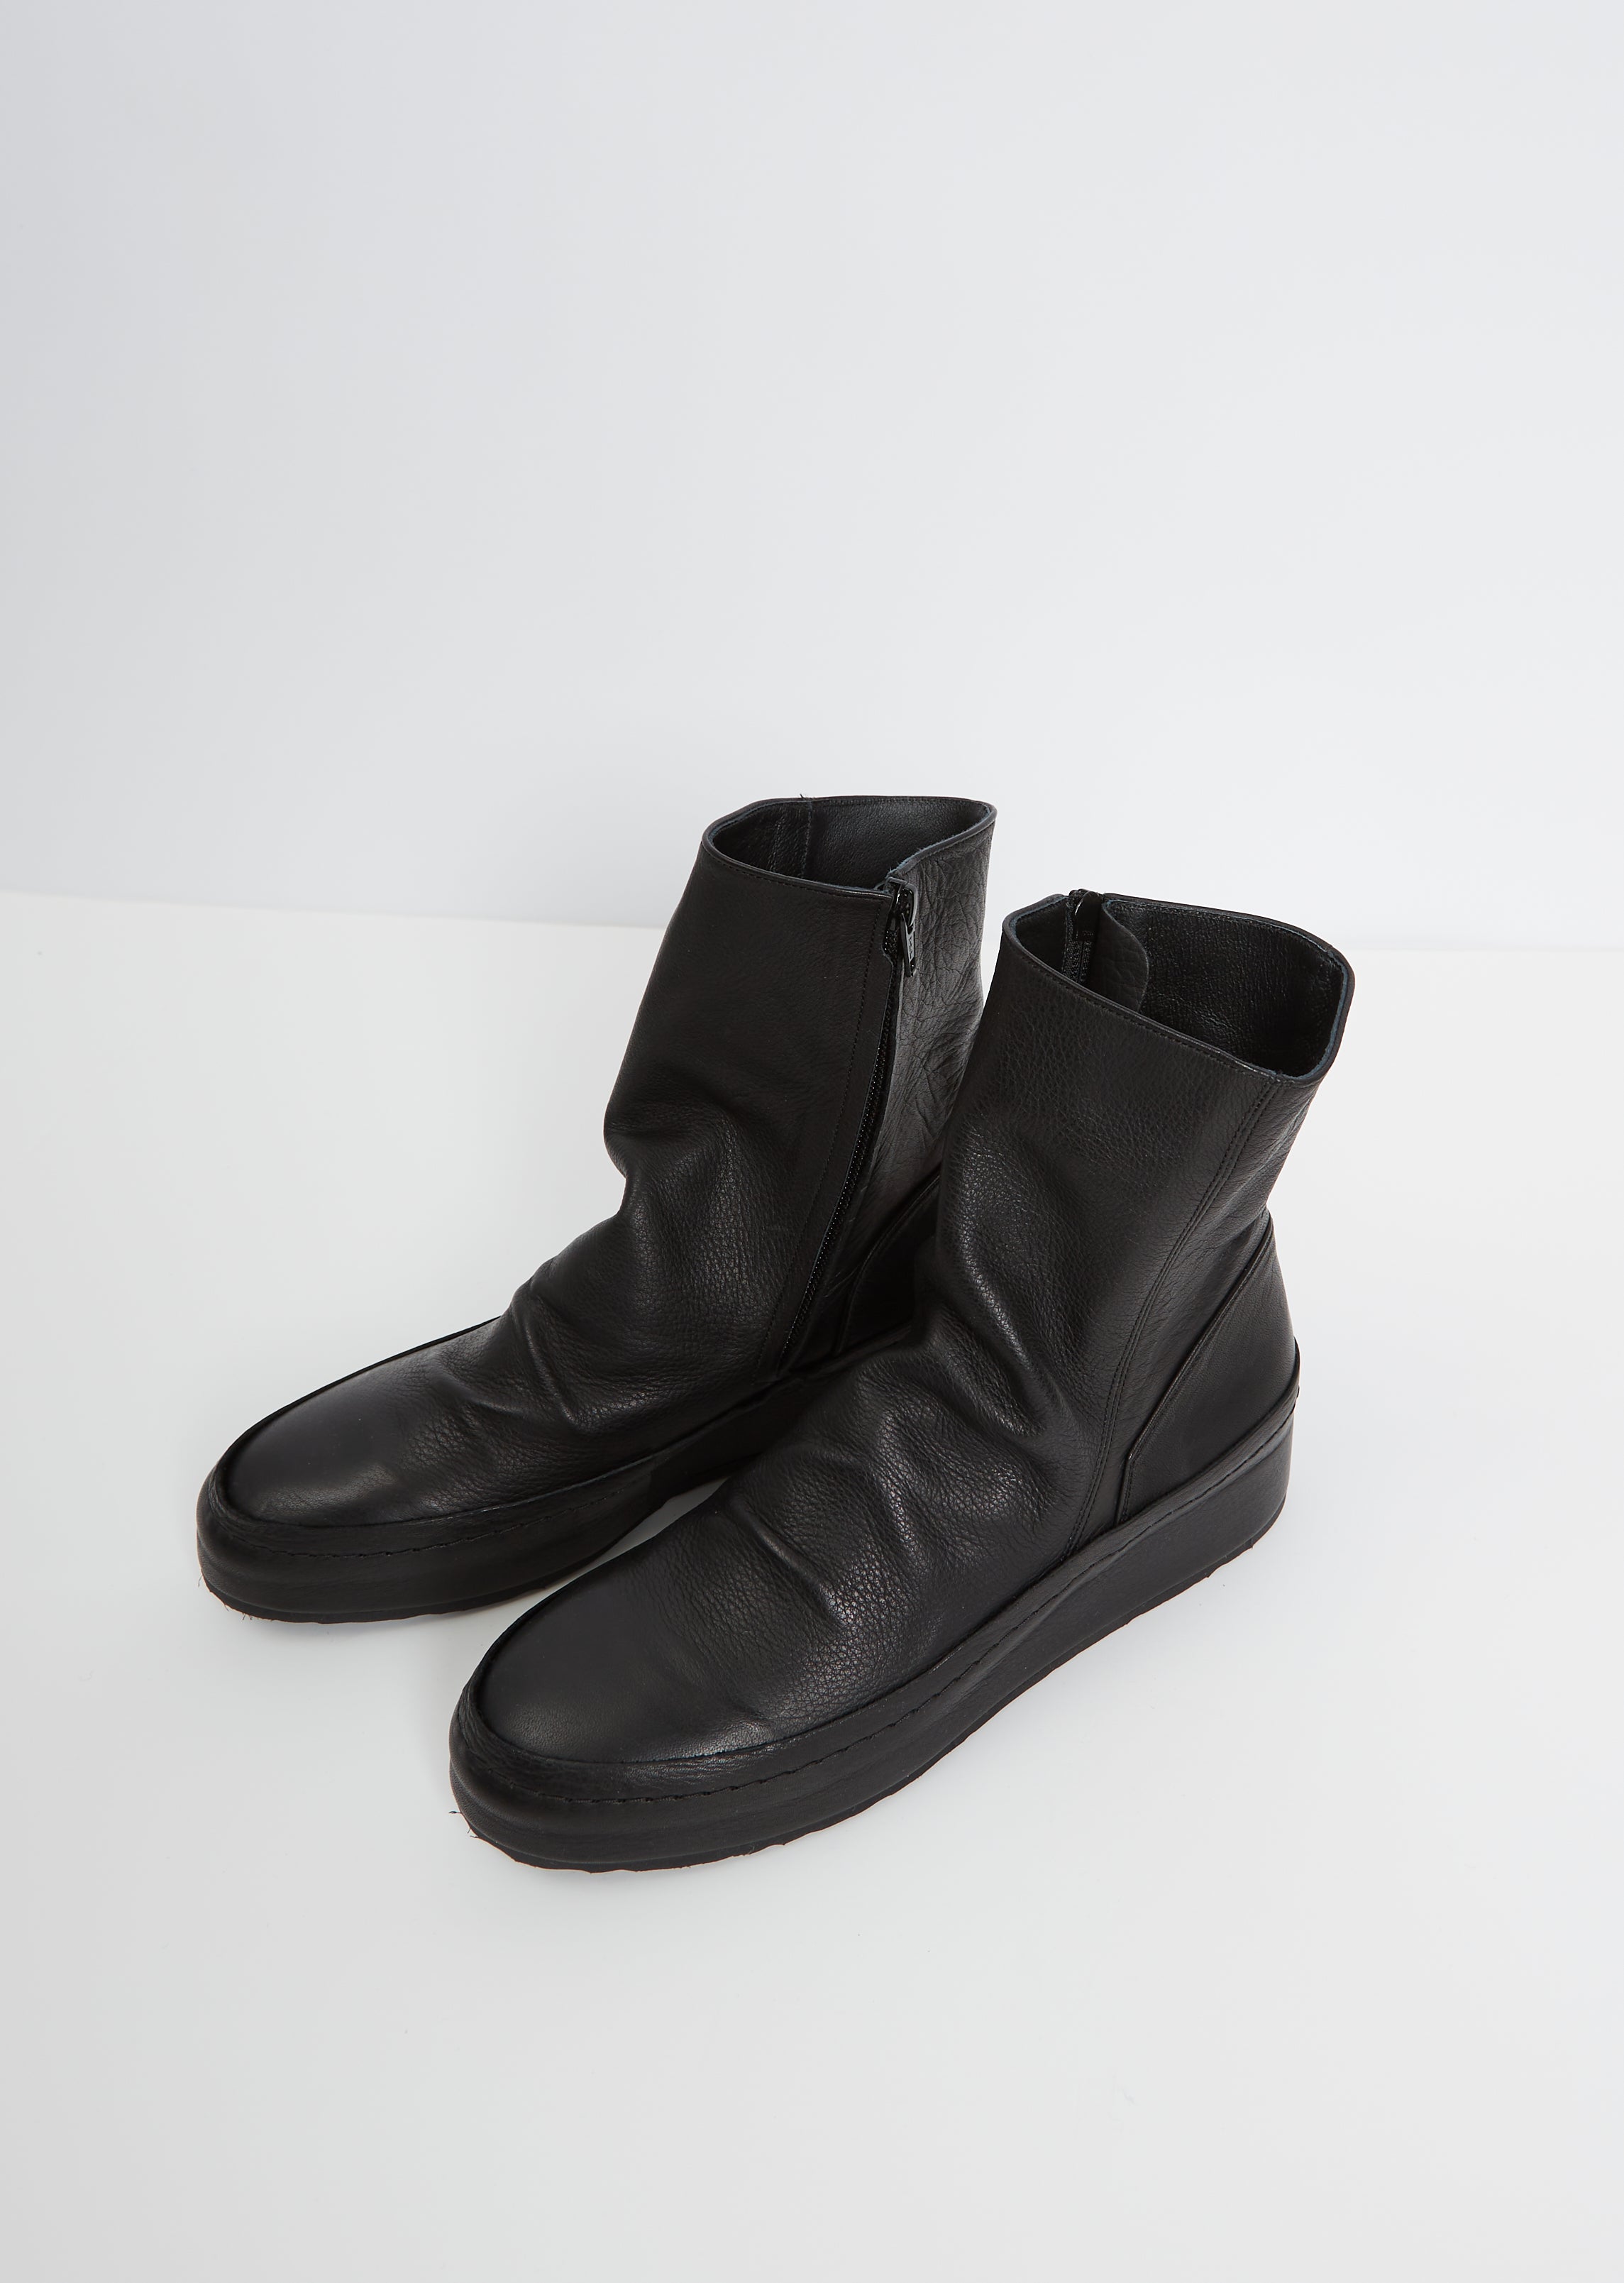 soft oiled leather rlatform drape boot | camillevieraservices.com